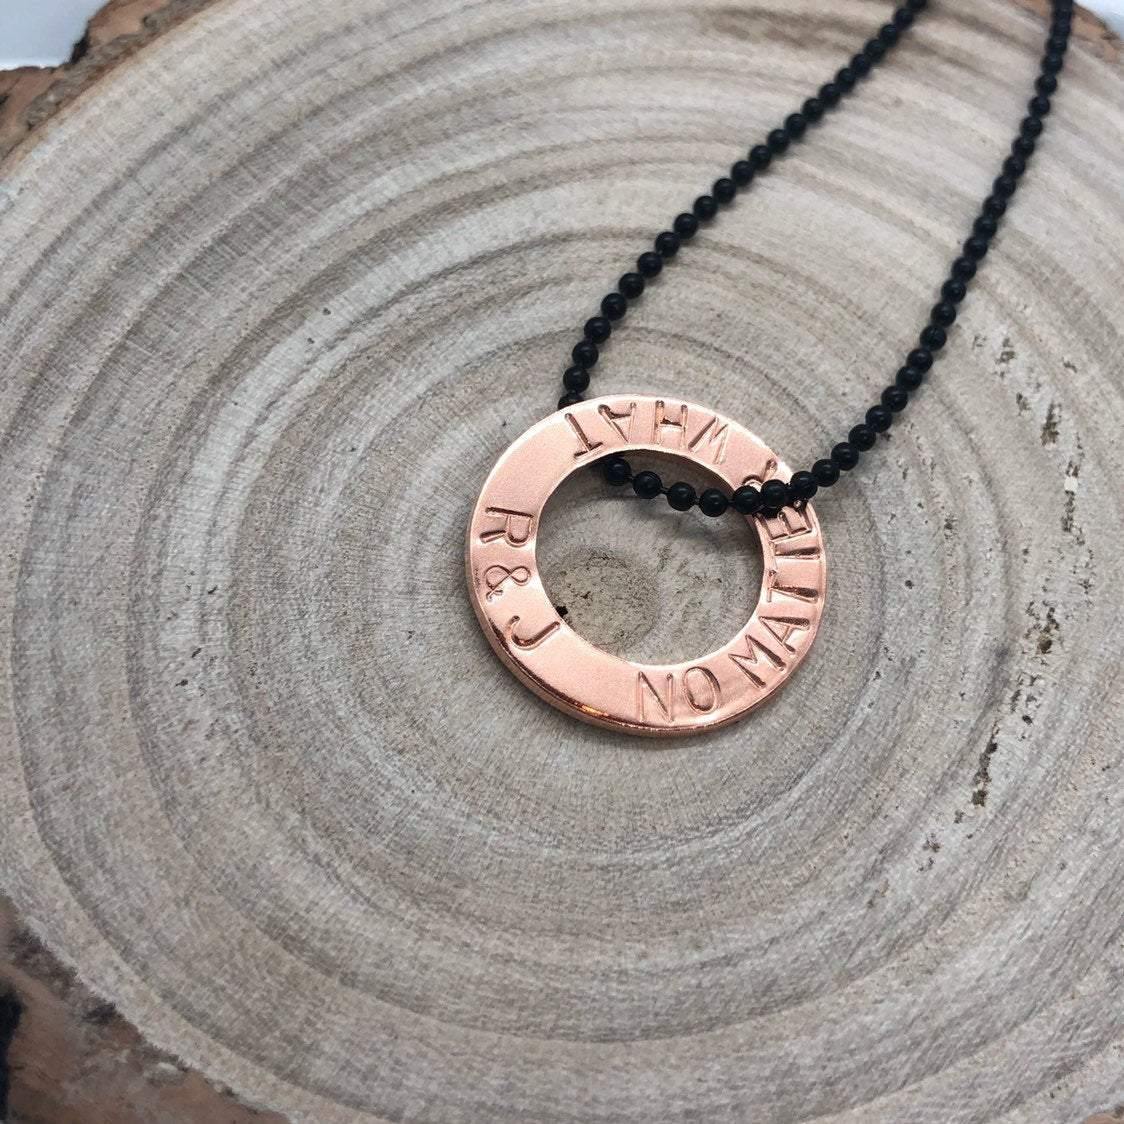 Men's personalised necklace, name necklace, mens jewellery, copper jewelry - The Little Stamping Co.